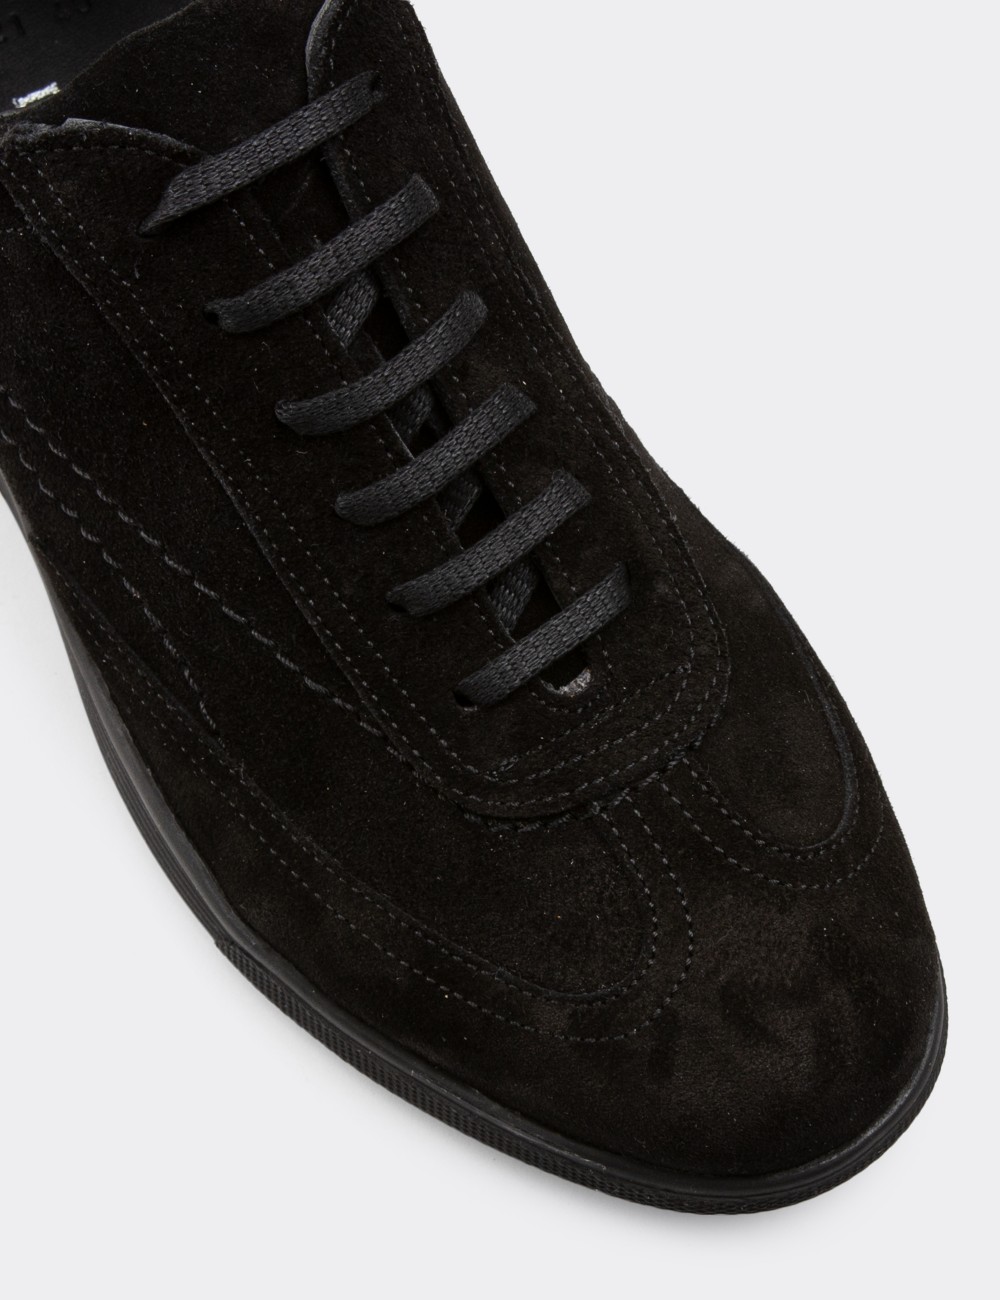 Black Suede Leather Lace-up Shoes - 00321MSYHC08